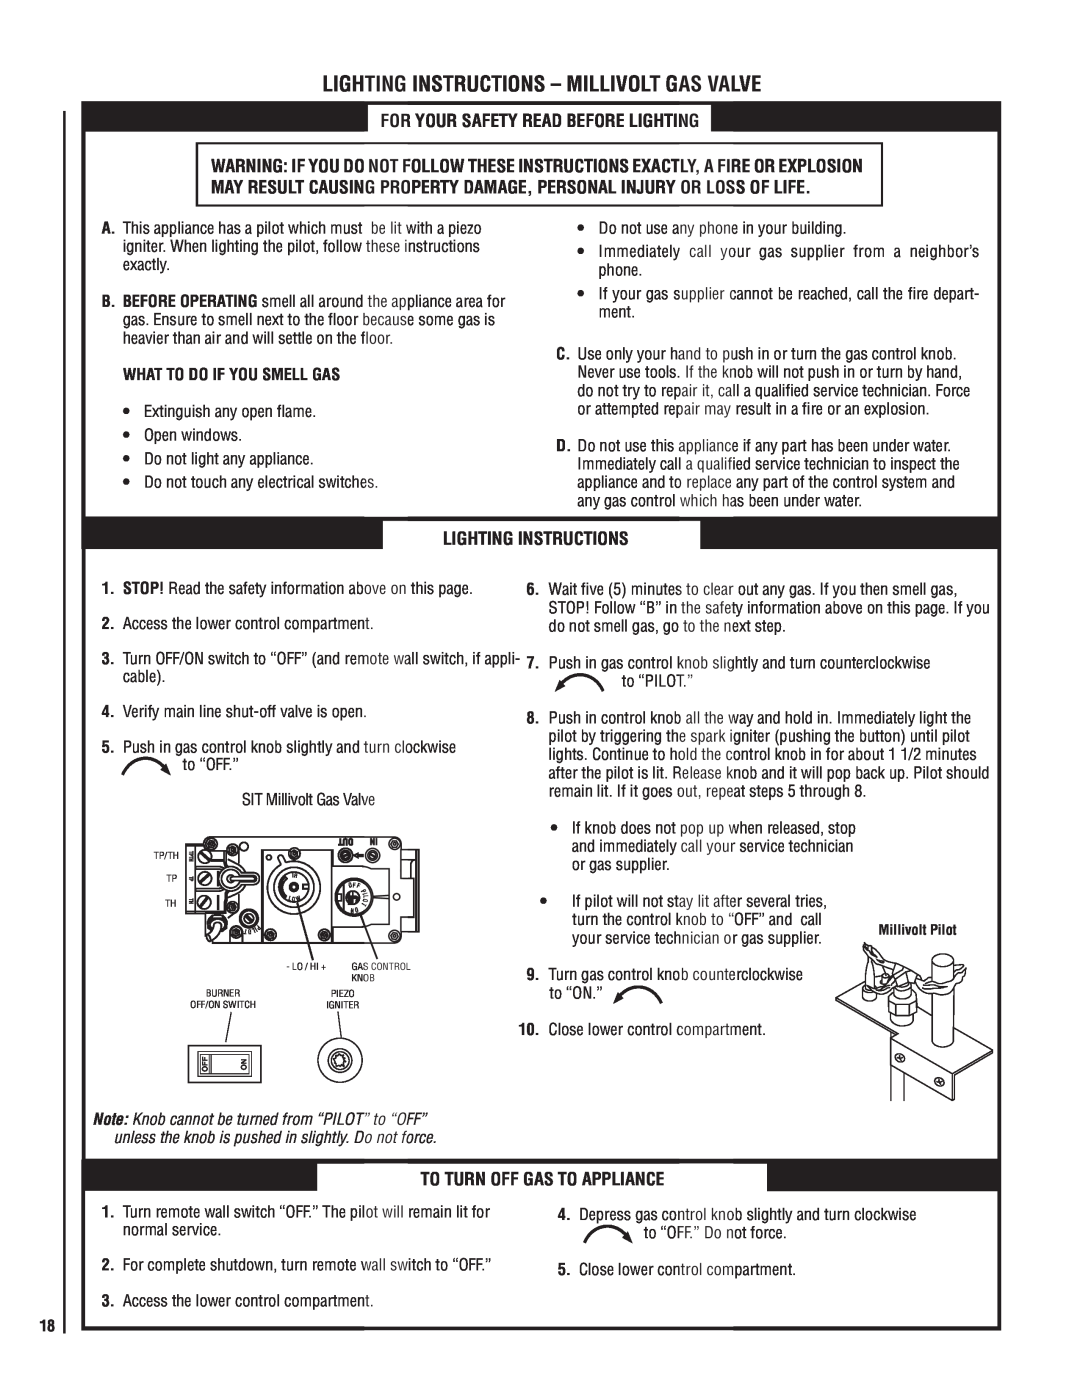 Lennox International Inc MPB35ST-NM manual For Your Safety Read Before Lighting, Lighting Instructions, normal service 